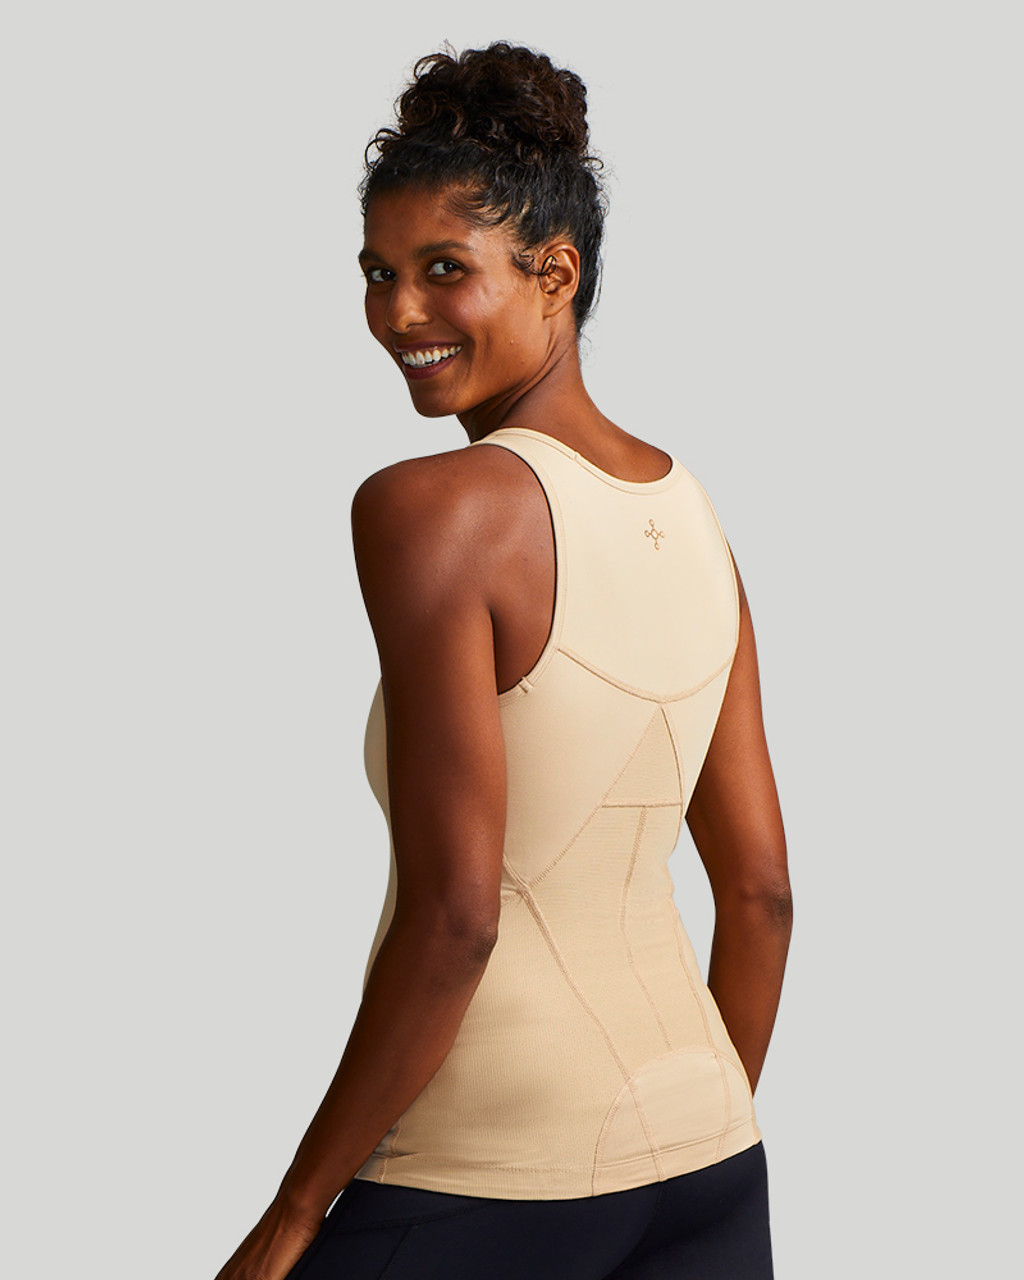  Tommie Copper for Women Lower Back Support Tank